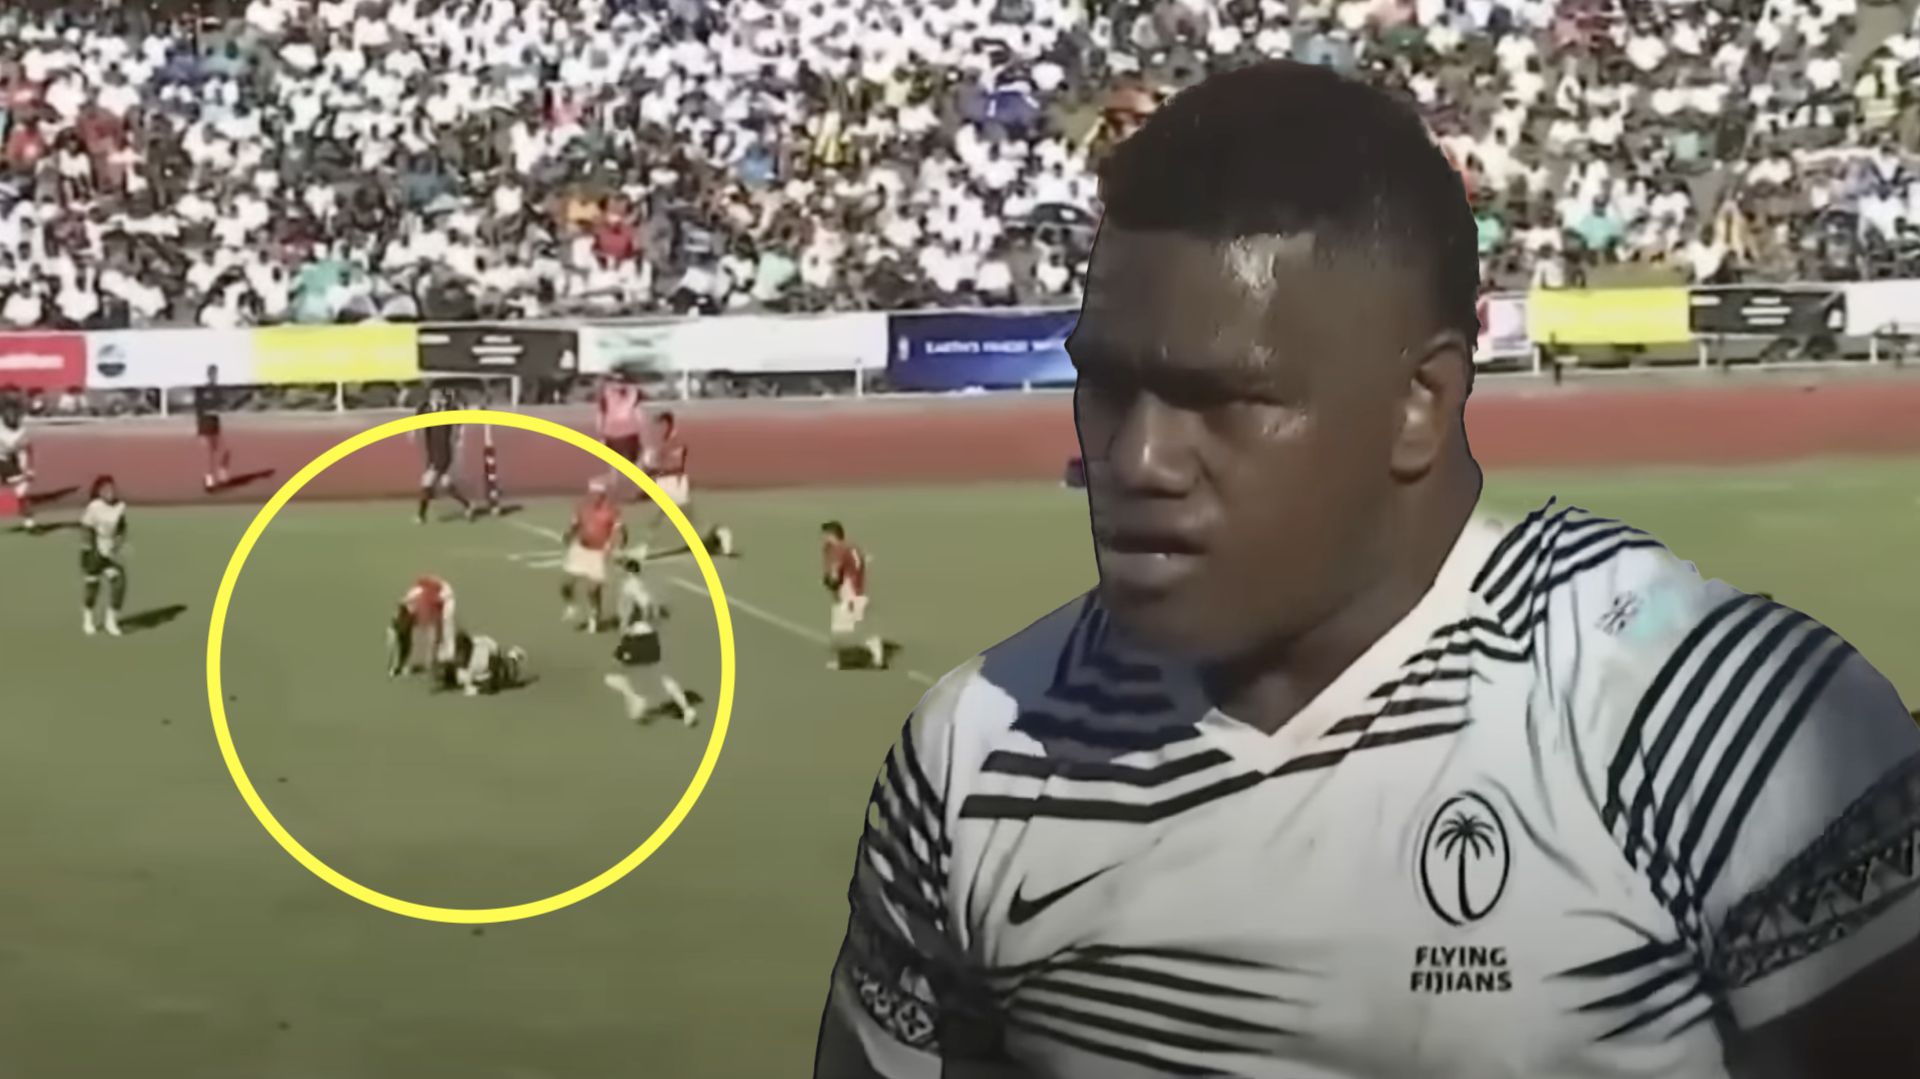 Tongan ex All Black smashes Josua Tuisova in rarest sight in rugby